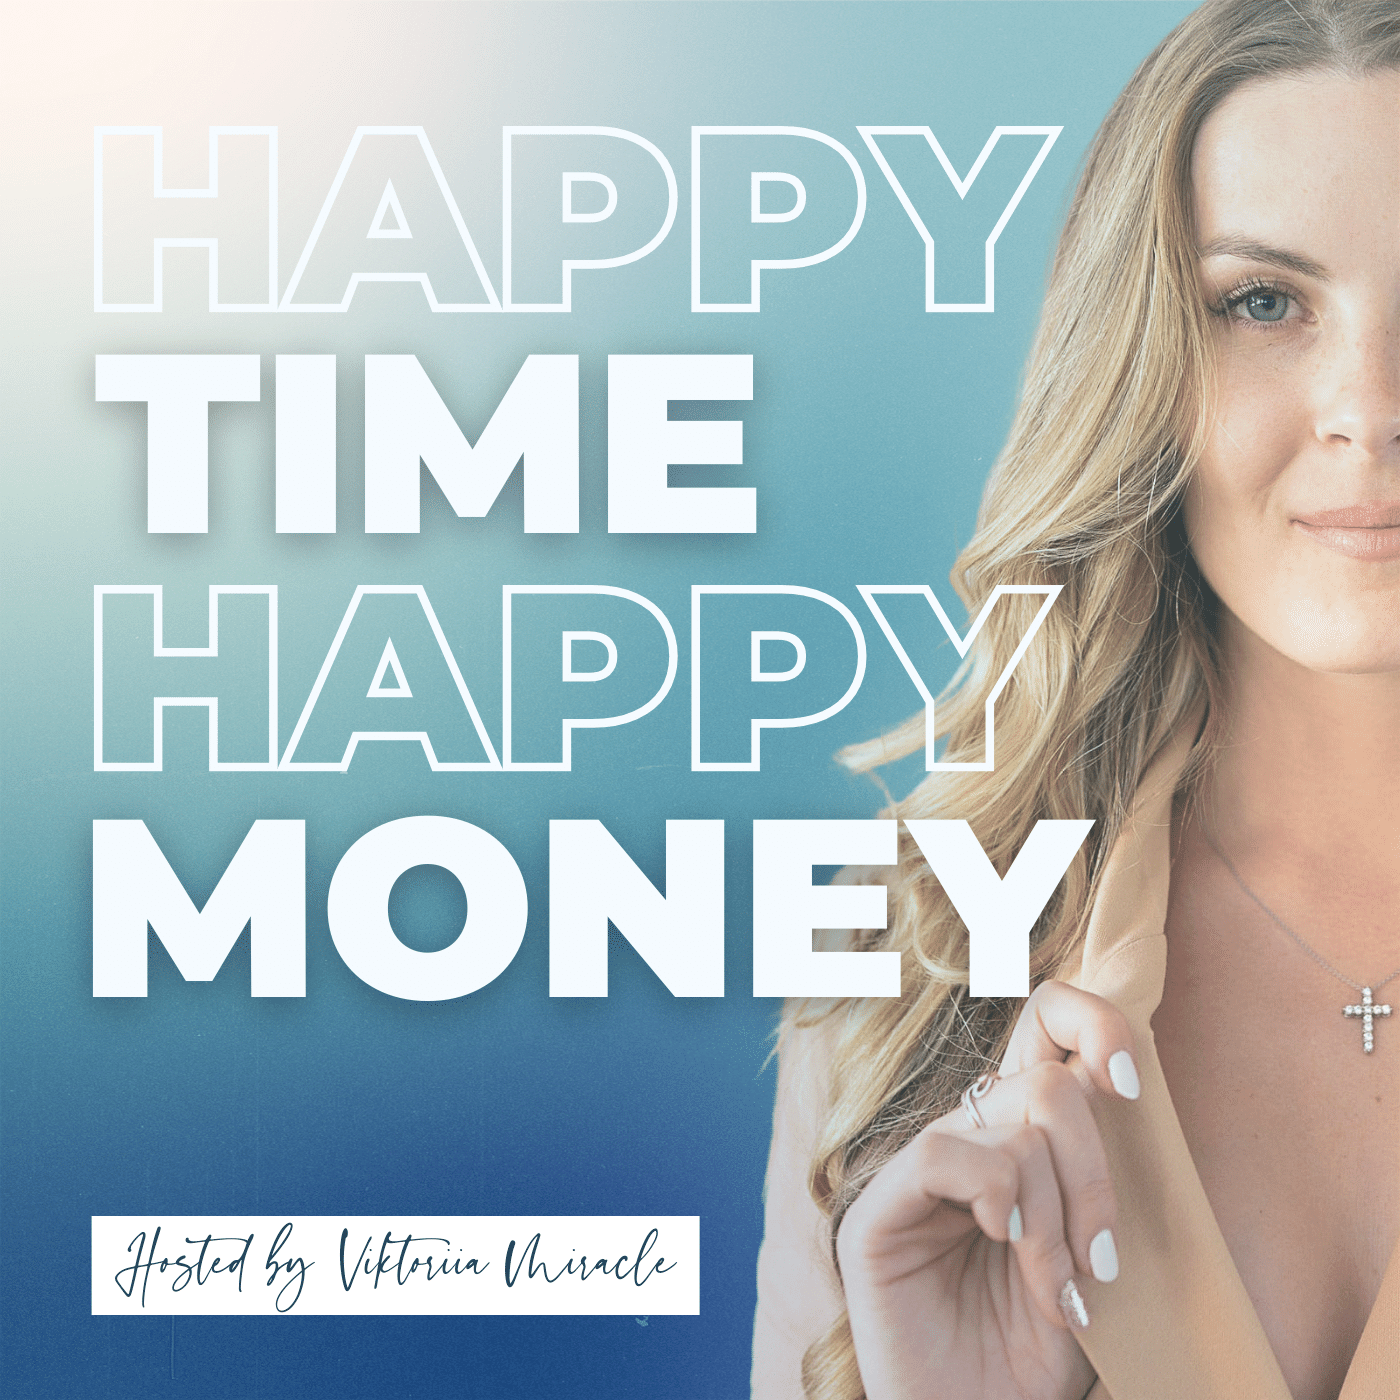 Artwork for podcast HAPPPY Time HAPPY Money